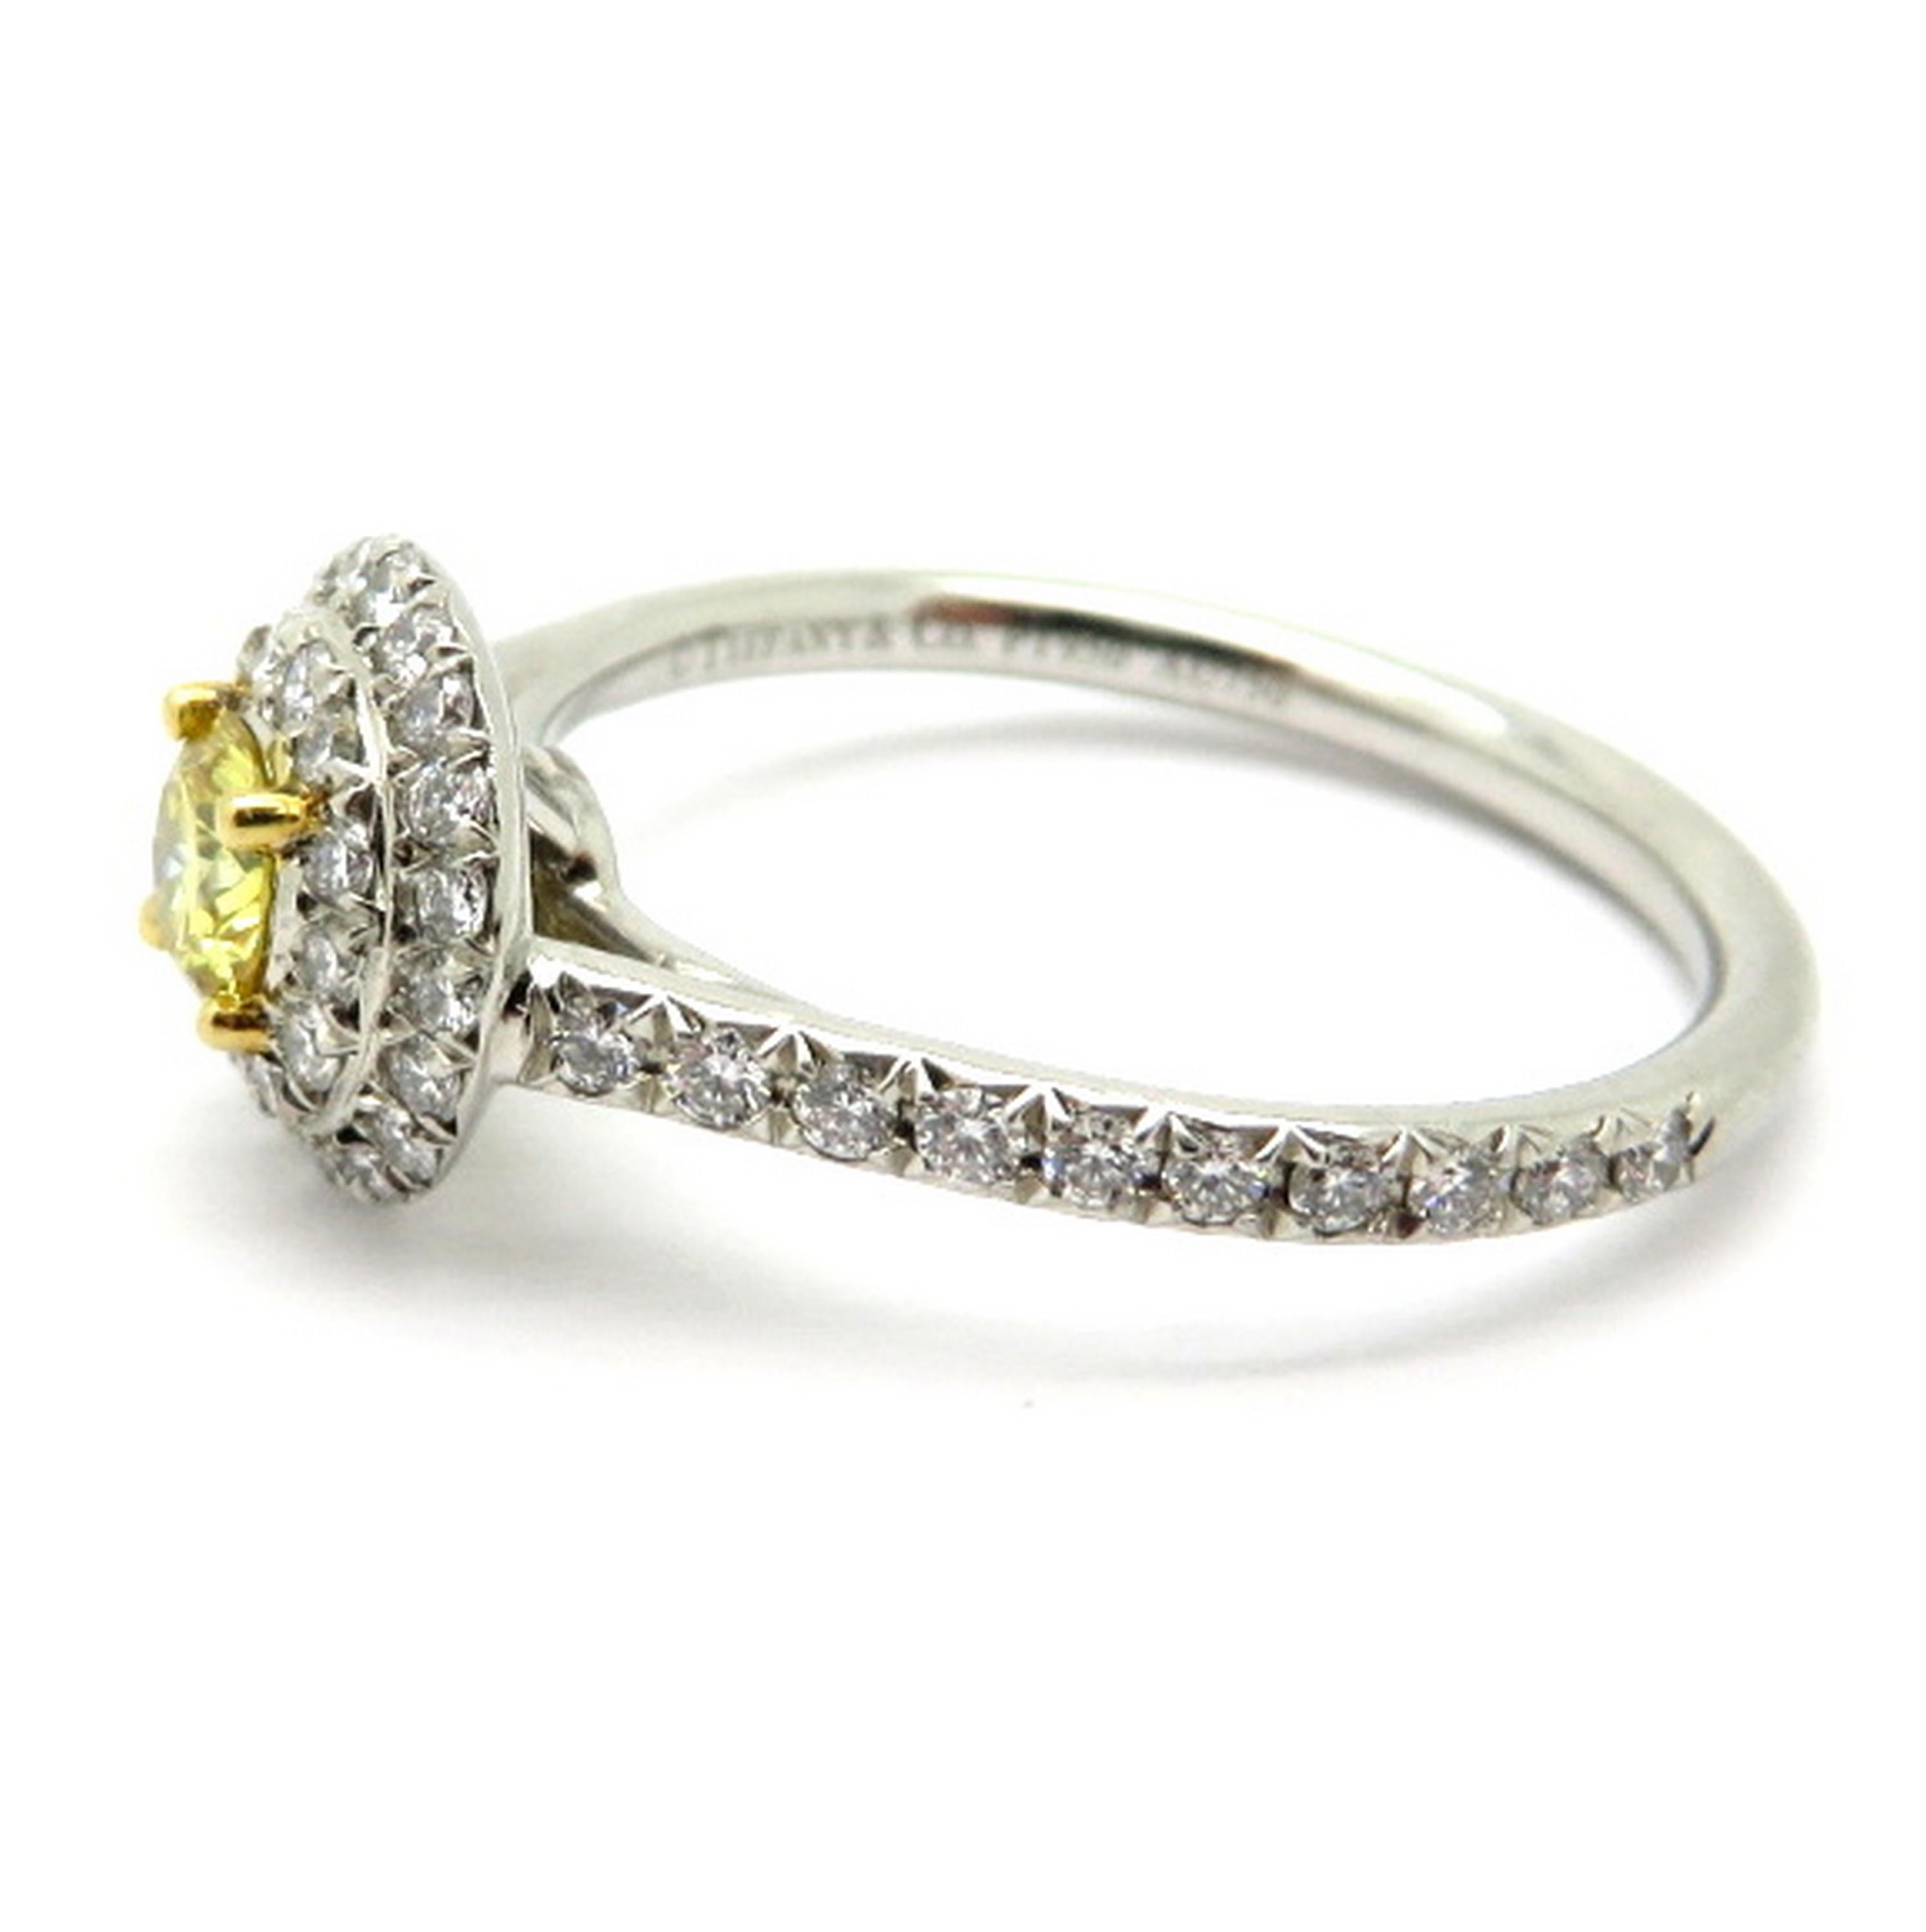 Designer Tiffany & Co. platinum and 18K yellow gold fancy vivid yellow double halo diamond engagement ring. Centering one round brilliant cut fancy vivid yellow diamond, four prong set, weighing approximately 0.23 carats, having VS1 clarity.